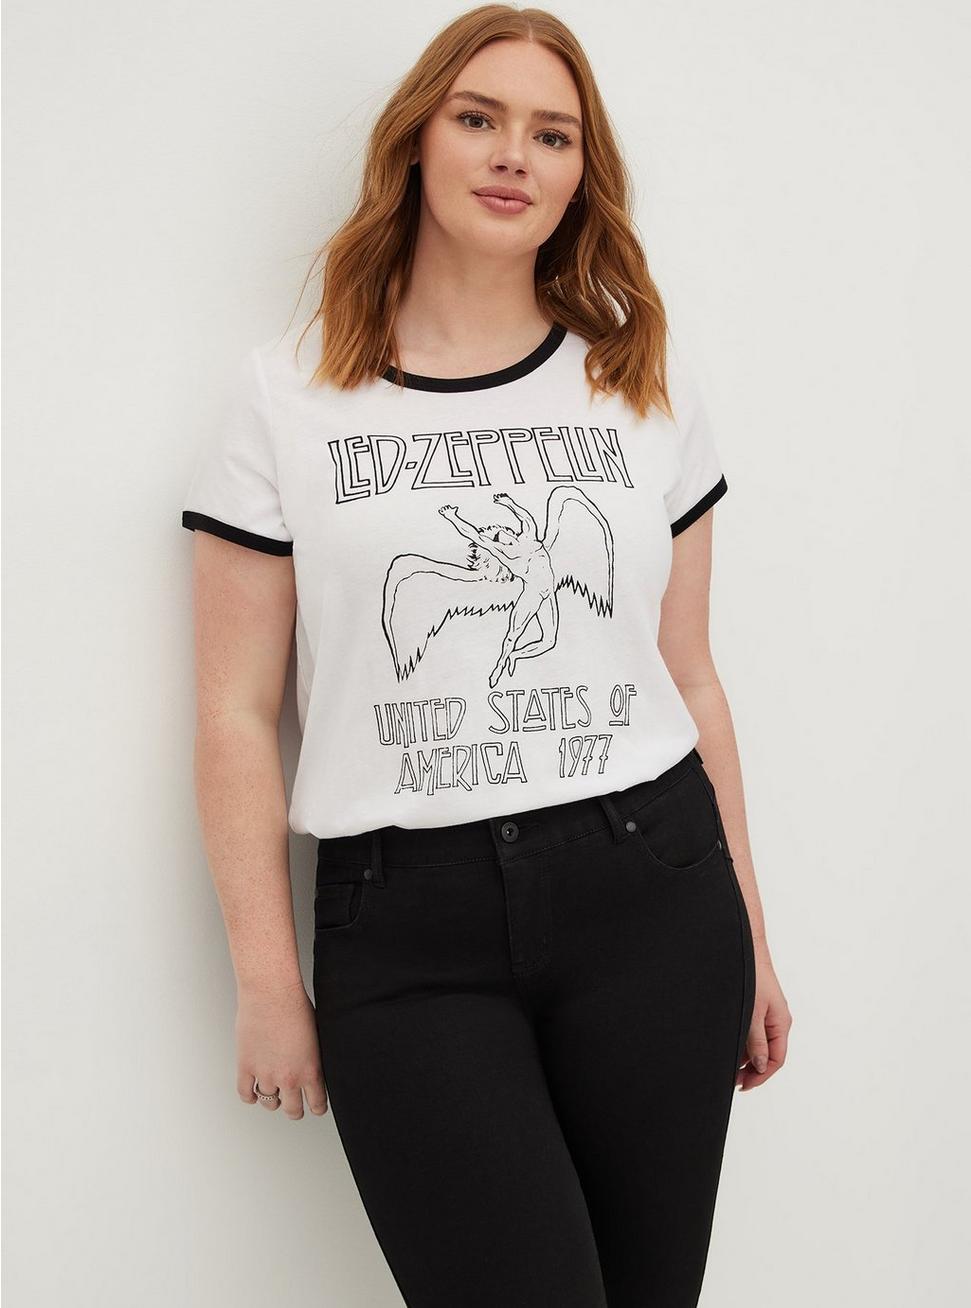 Led Zeppelin Classic Fit Ringer Tee - Cotton White, BRIGHT WHITE, hi-res